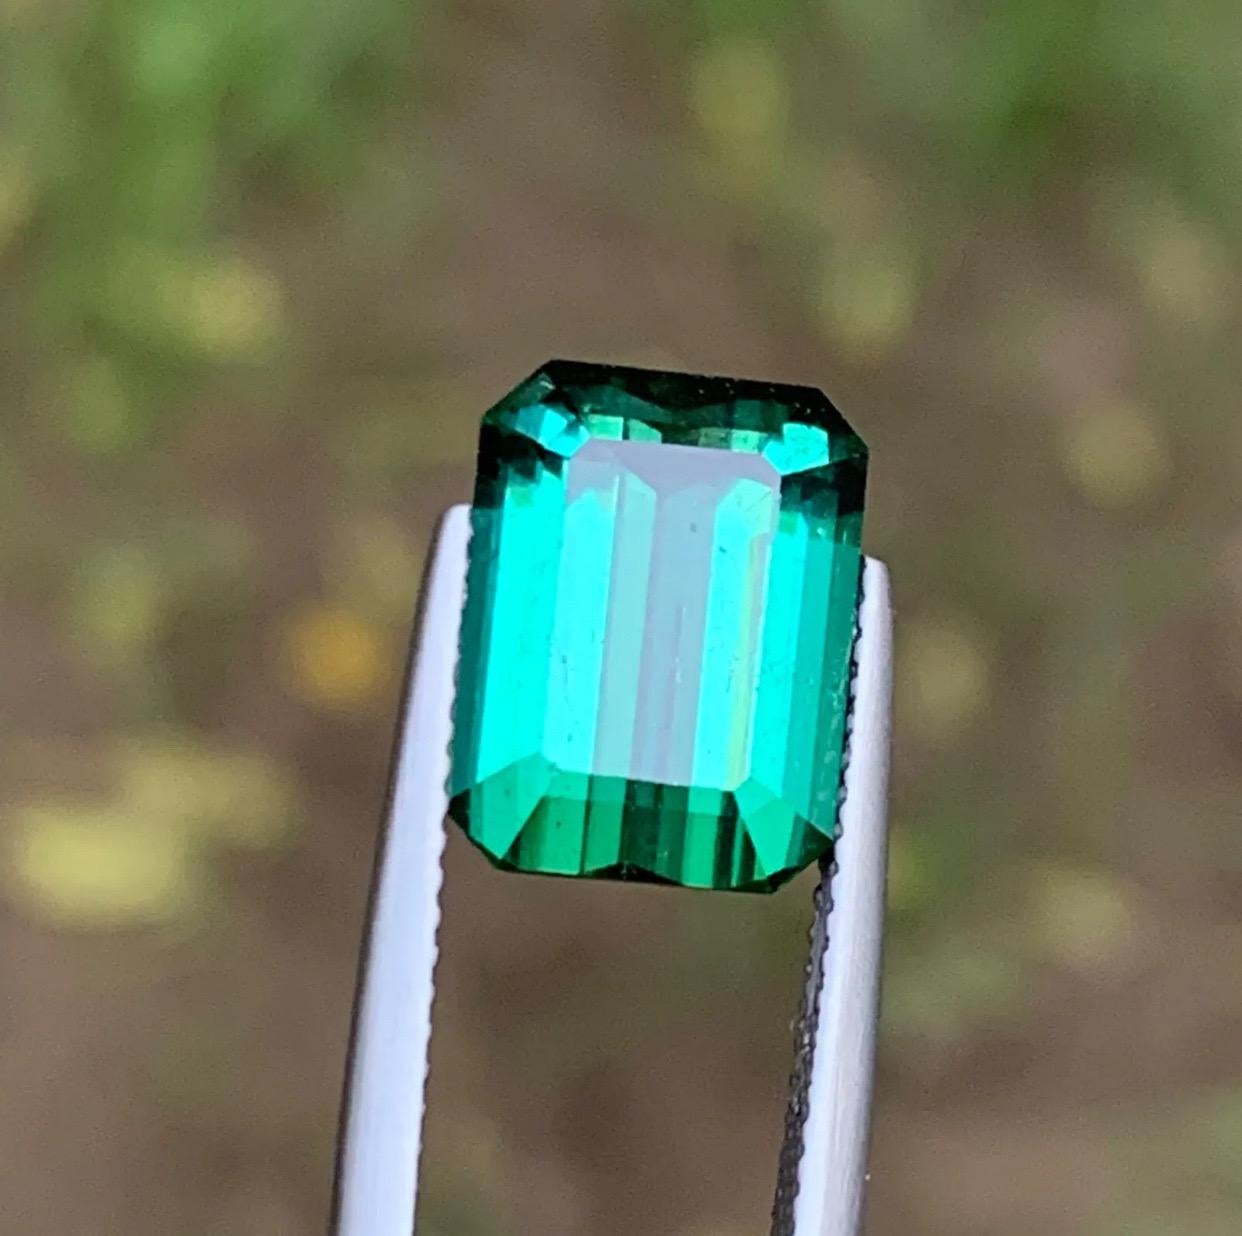 Gemstone Type: Tourmaline
Weight: 6.50 Carats
Dimensions: 11.84 x 8.98 x 6.83
Color: Bluish Green
Clarity: Slightly Included
Treatment: Not Treated
Origin: Afghanistan
Certificate: On demand 

Introducing our exquisite Bluish Green Natural